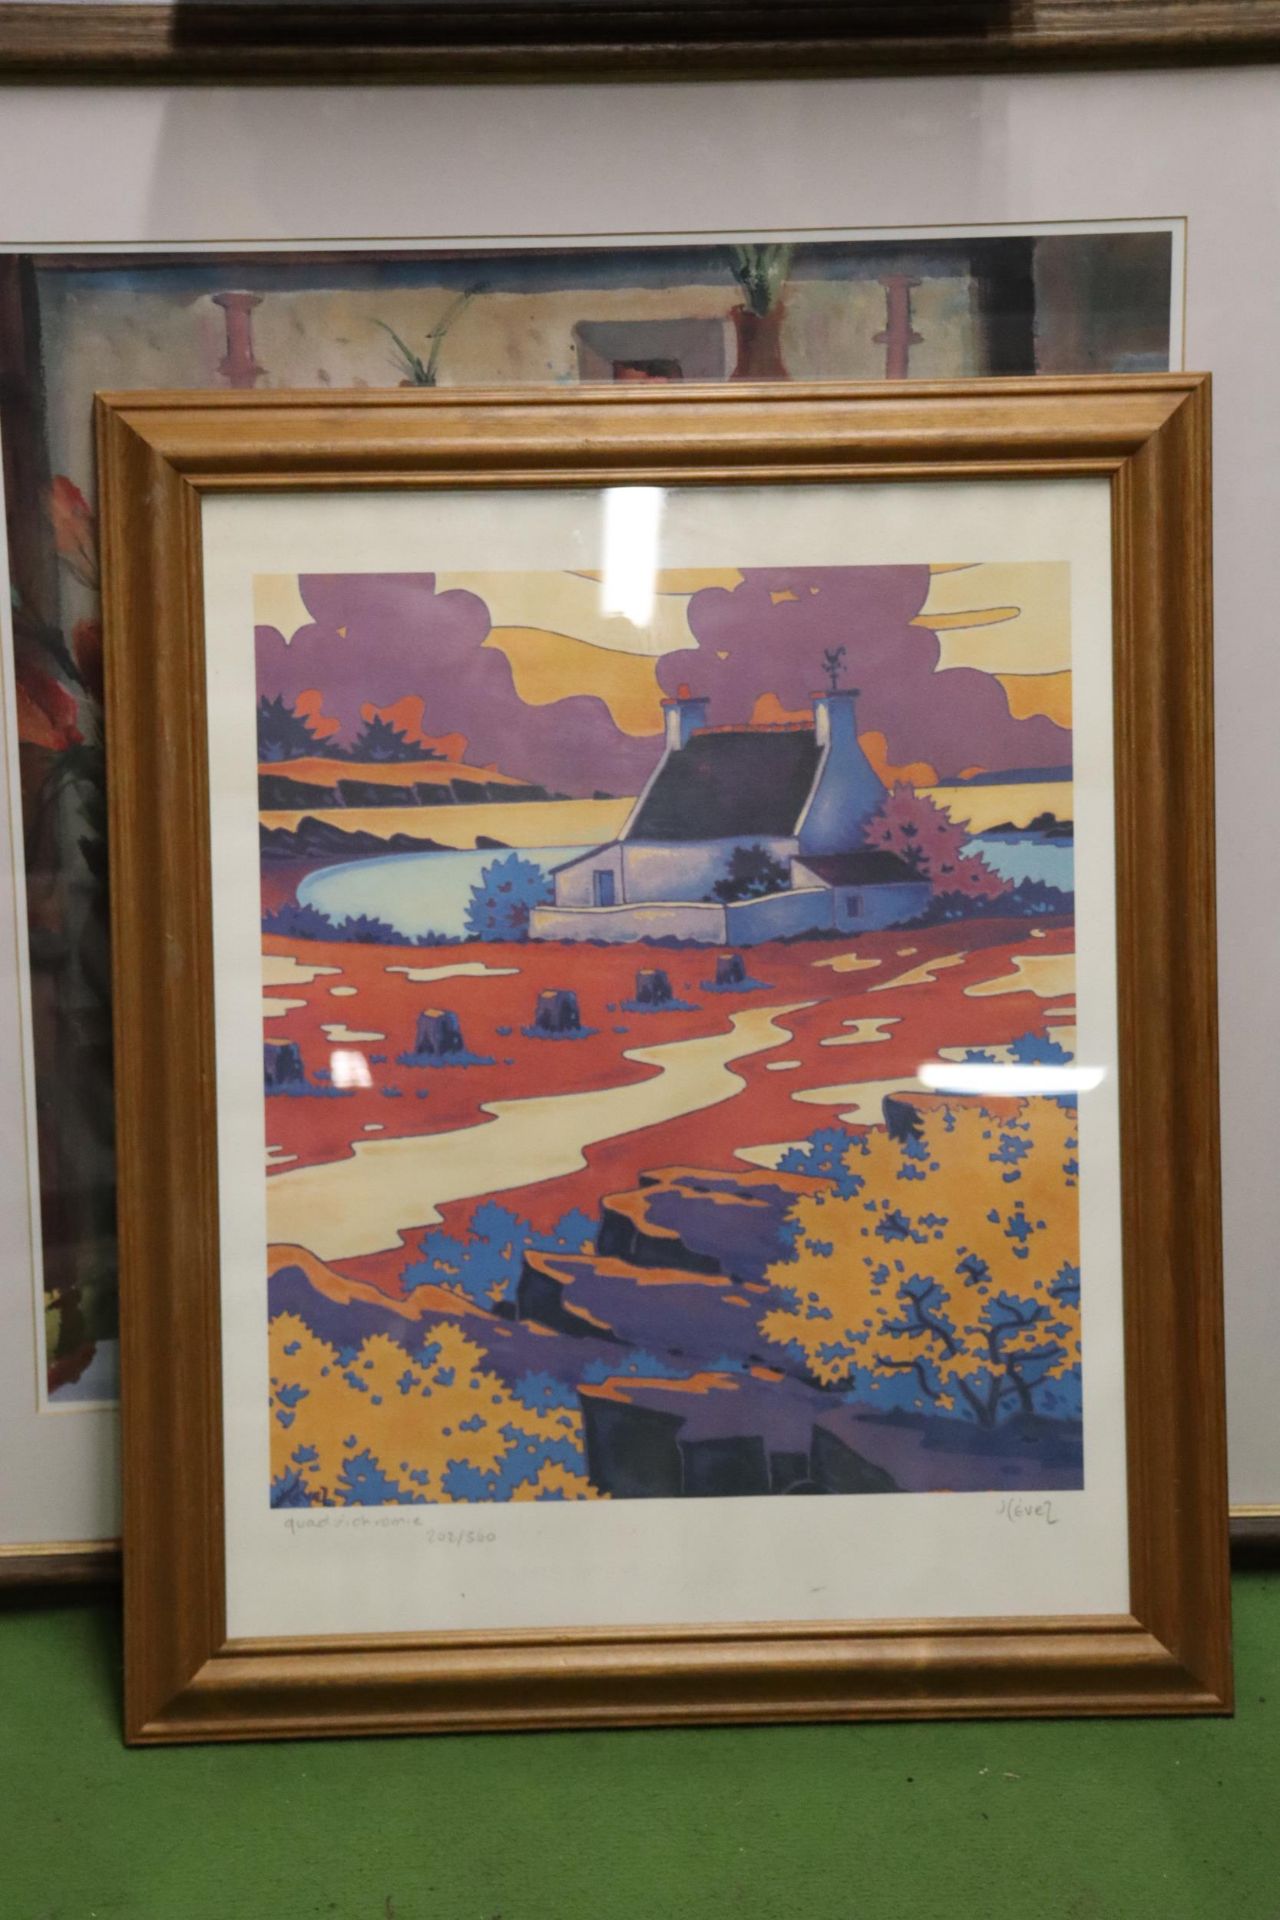 A LIMITED EDITION 202/500 FRAMED PRINT OF A COLOURFUL COUNTRYSIDE SCENE TOGETHER WITH A OPEN - Image 2 of 10